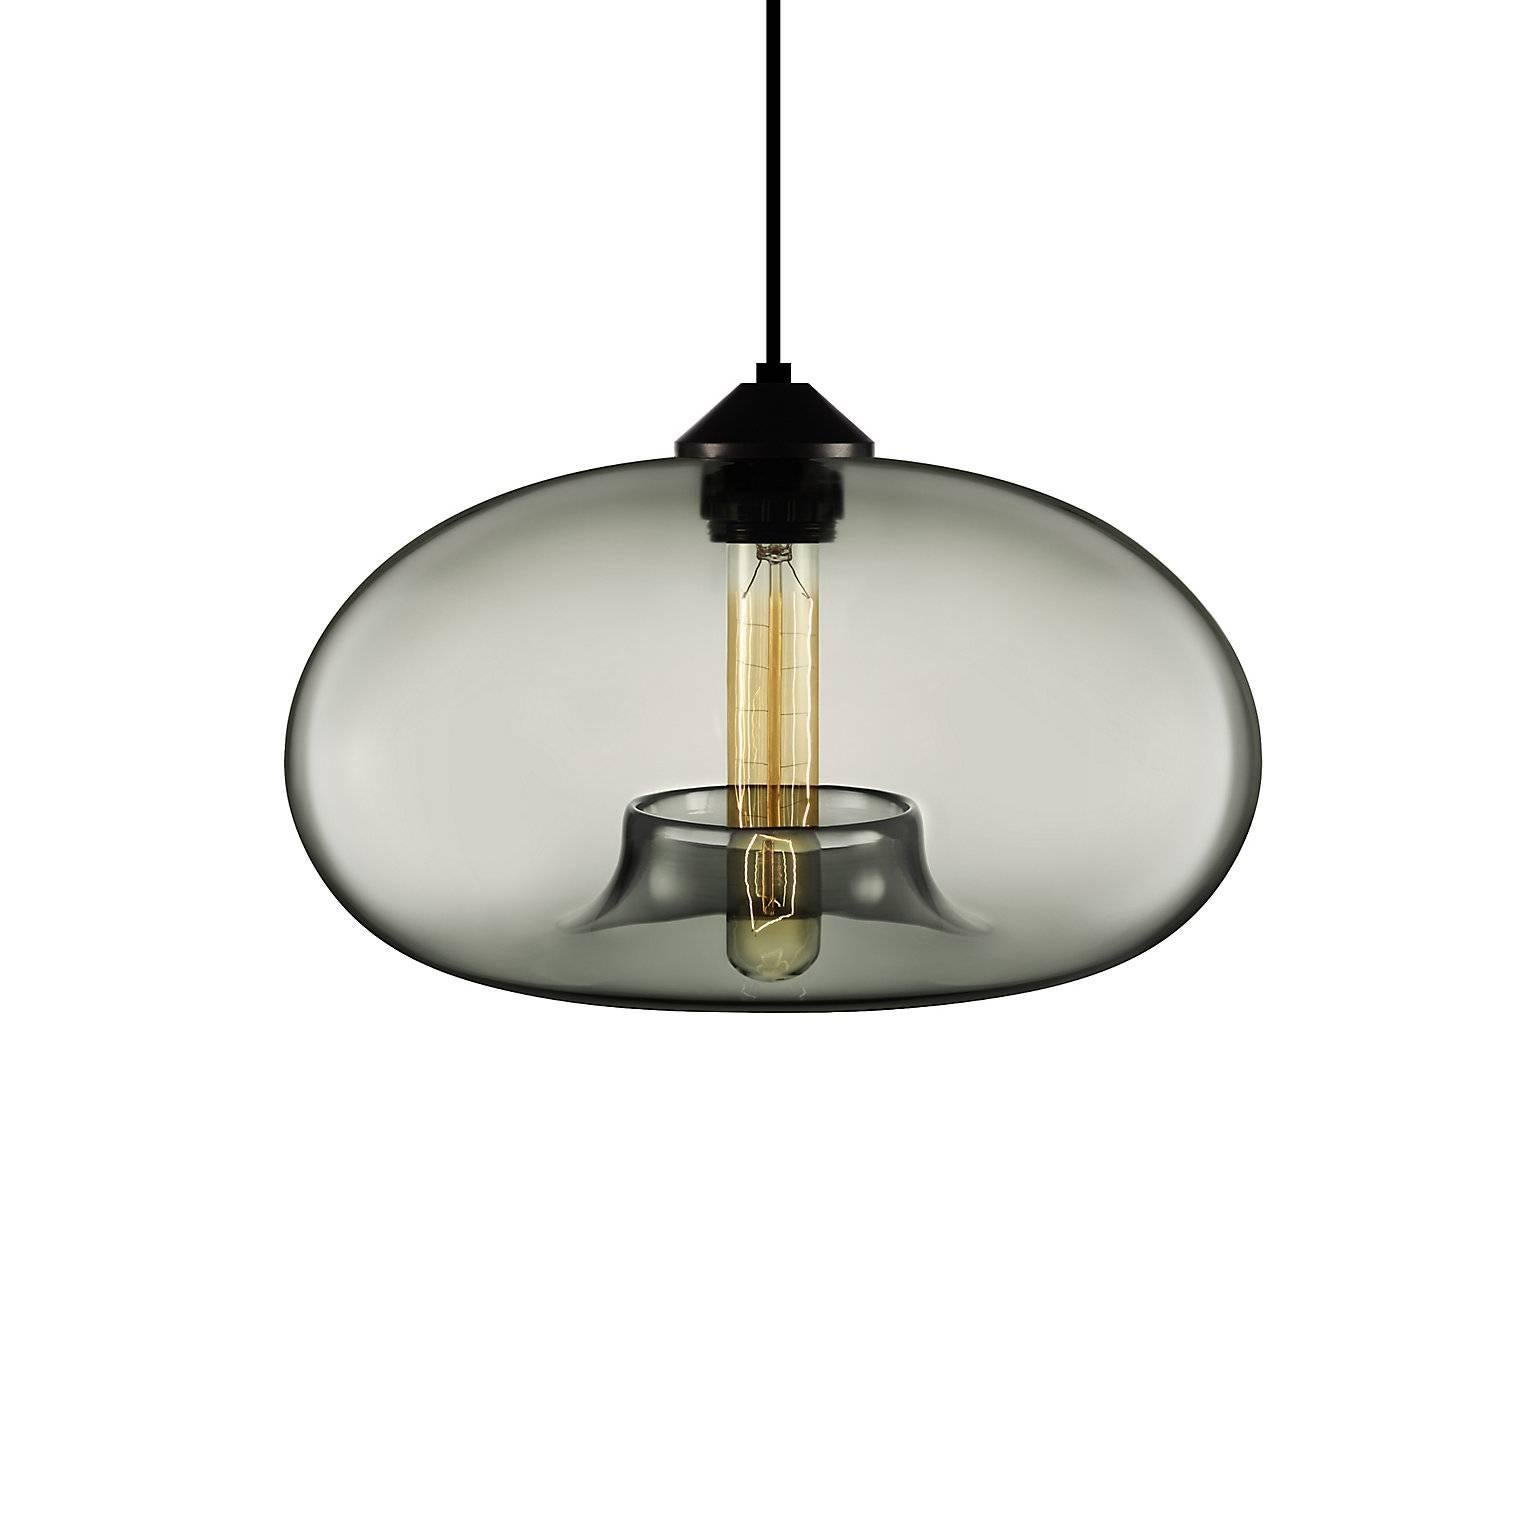 Conjuring the awe of the northern lights, the Aurora pendant’s distinctive shape captures the craftsmanship and artistry of handblown glass. Every single glass pendant light that comes from Niche is handblown by real human beings in a